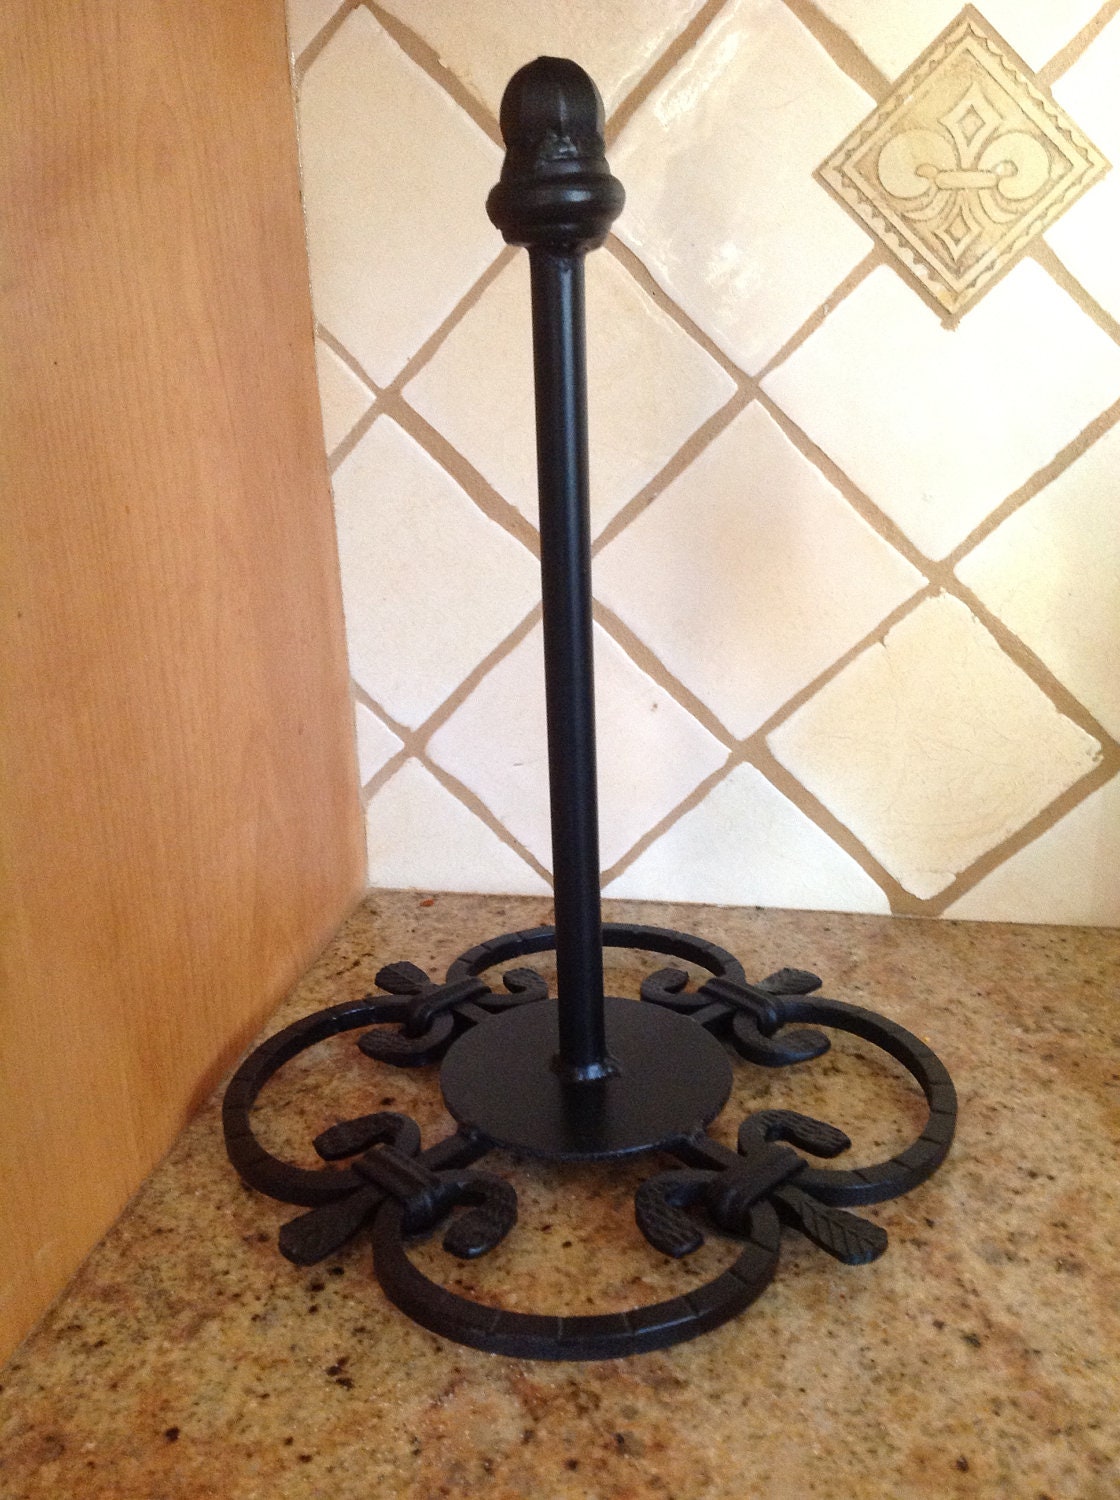 Paper towel holder | Etsy - Wrought iron paper towel holder